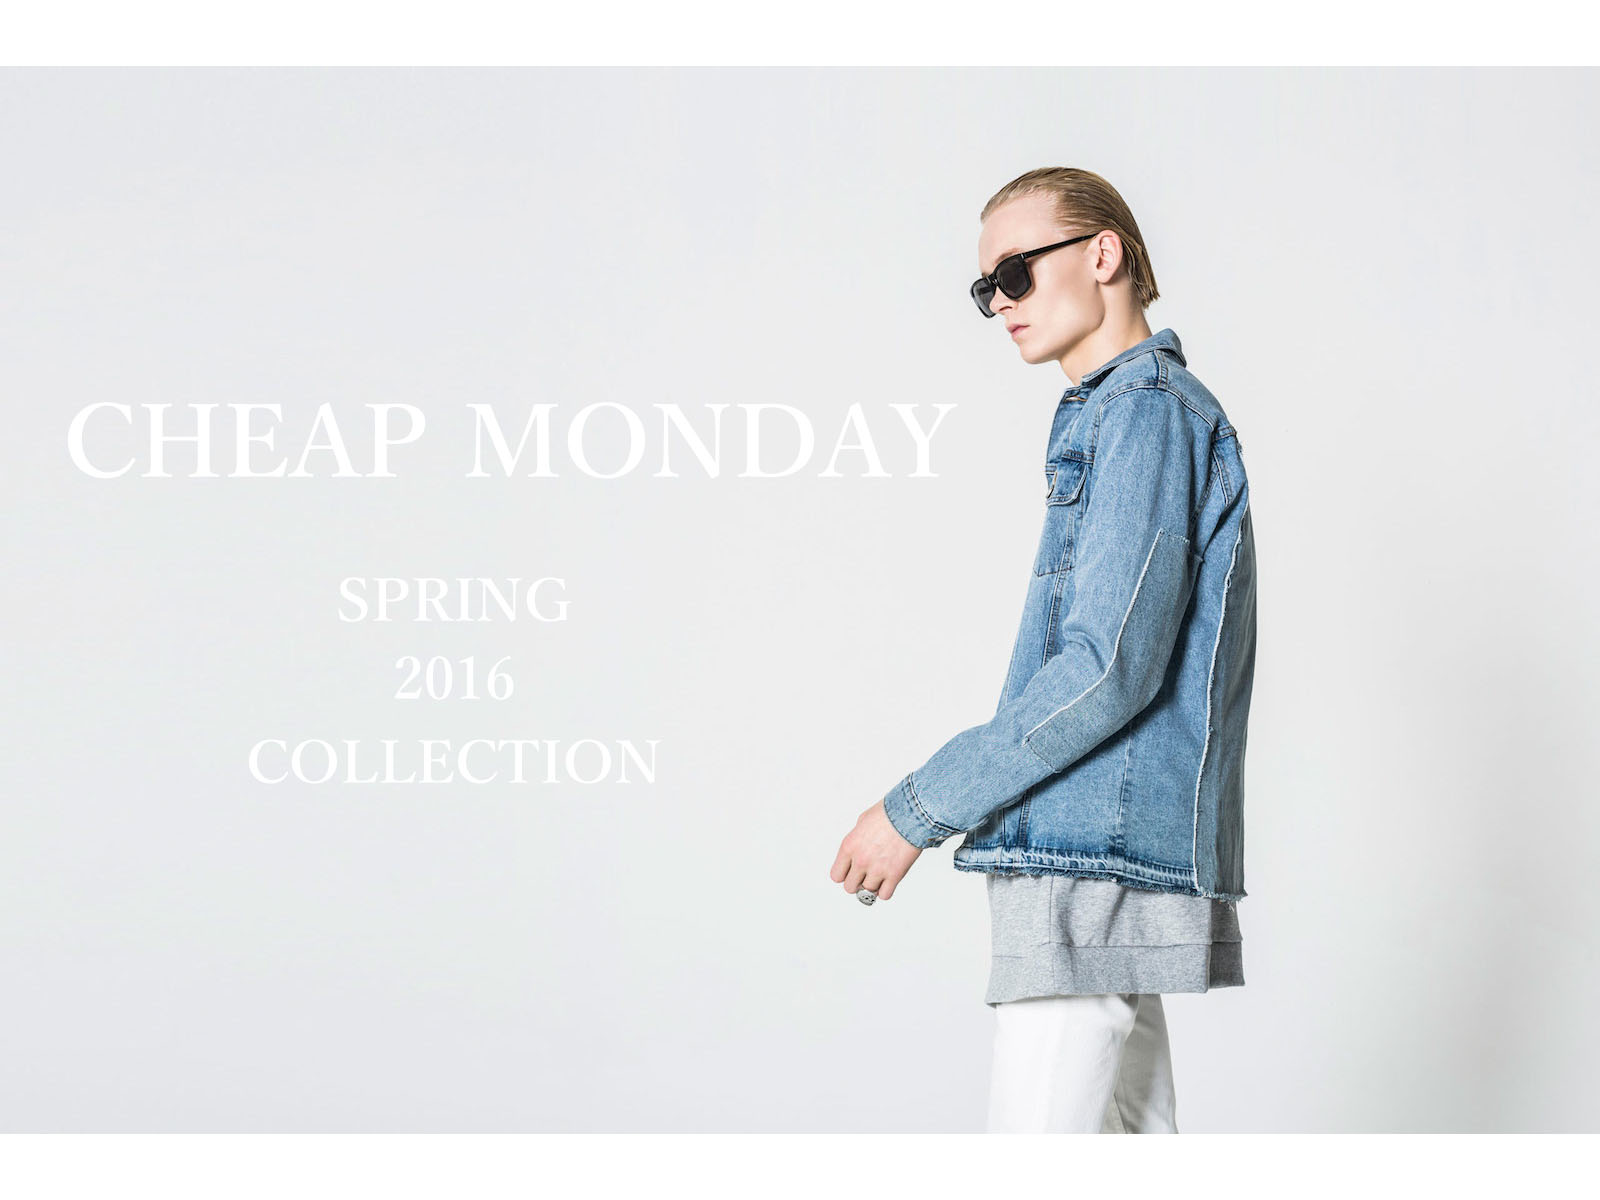 NEW ARRIVAL – CHEAP MONDAY SPRING 2016 2nd Delivery